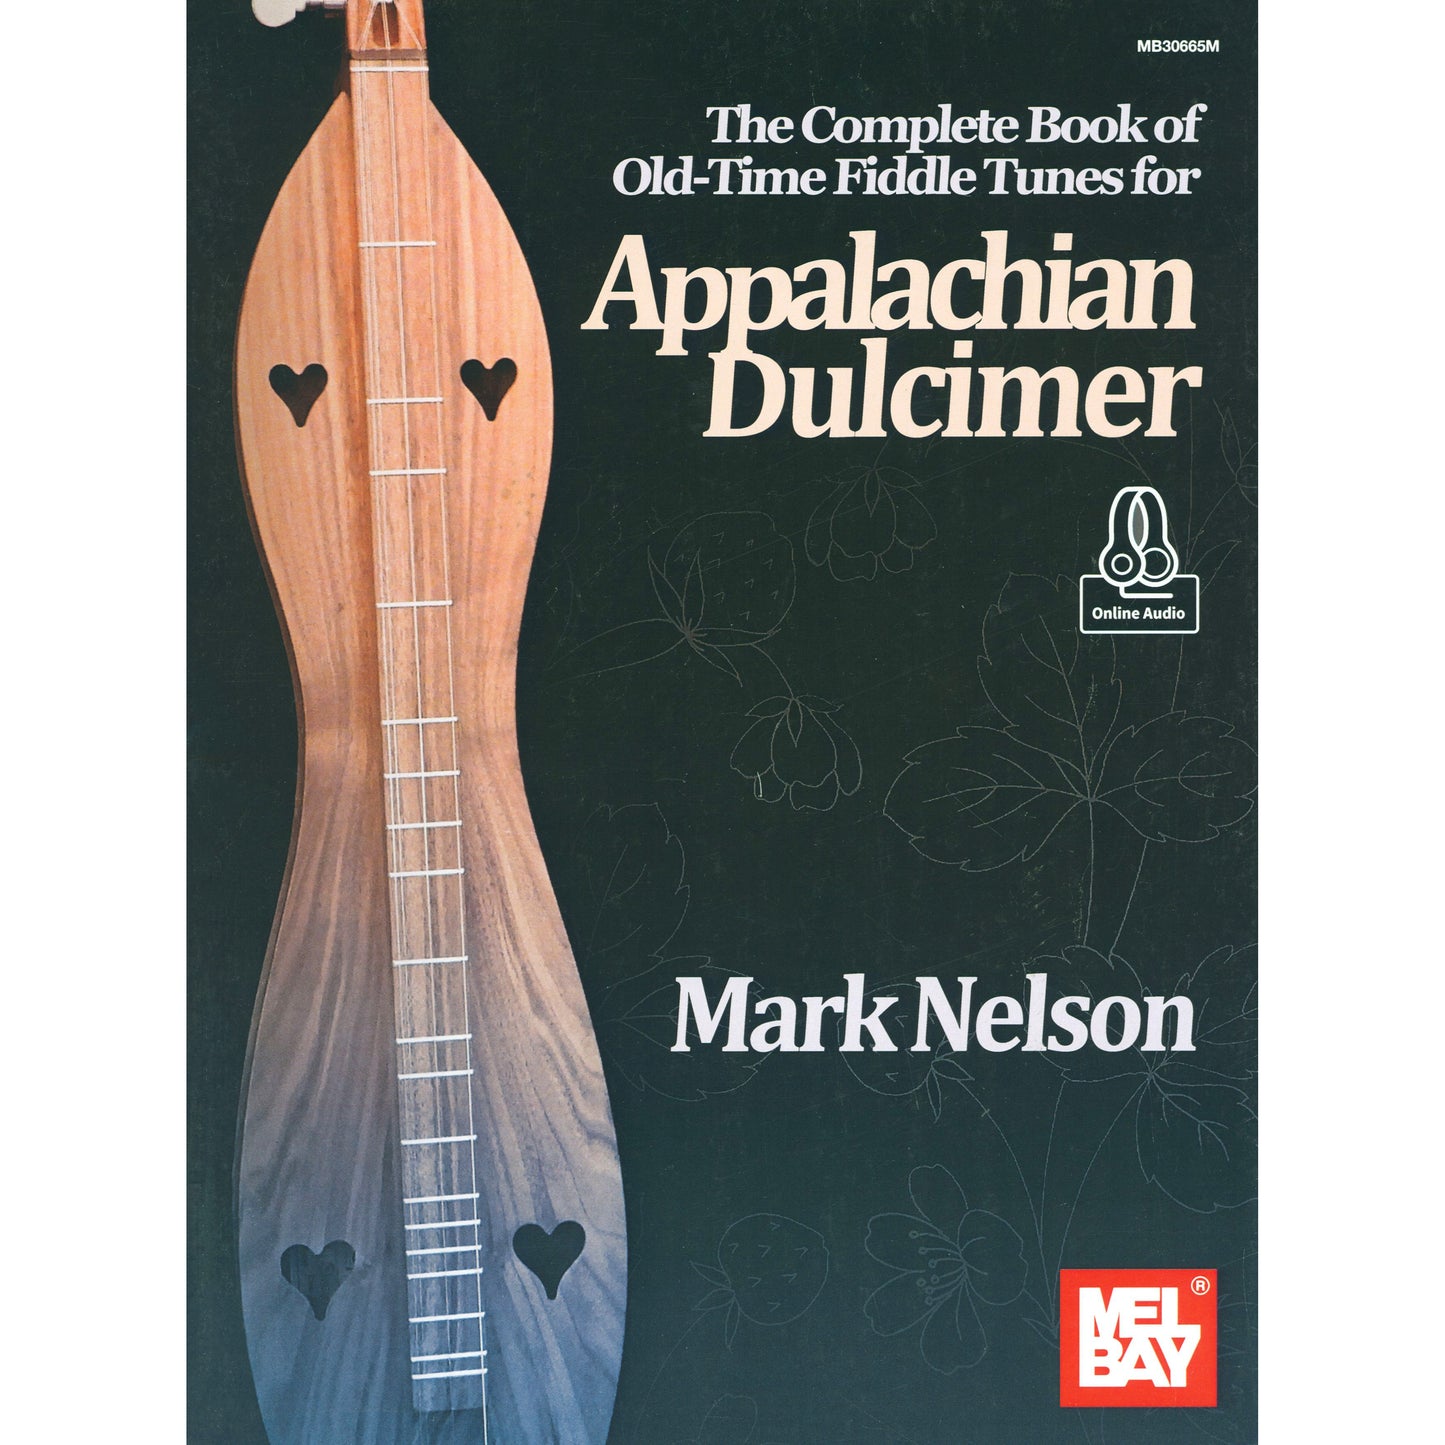 Image 1 of The Complete Book of Old-Time Fiddle Tunes for Appalachian Dulcimer by Mark Nelson - SKU# 02-30665M : Product Type Media : Elderly Instruments